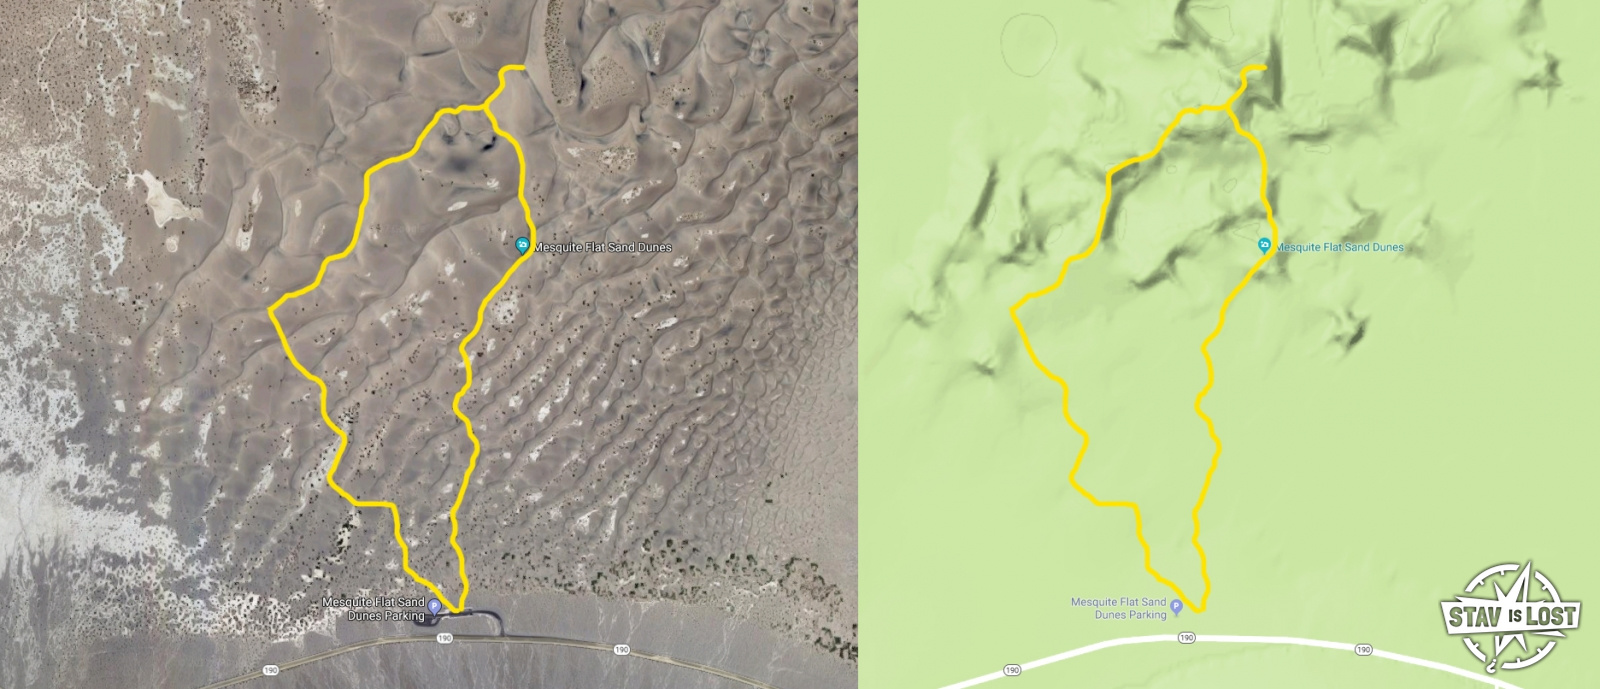 map for Mesquite Flat Sand Dunes by stav is lost